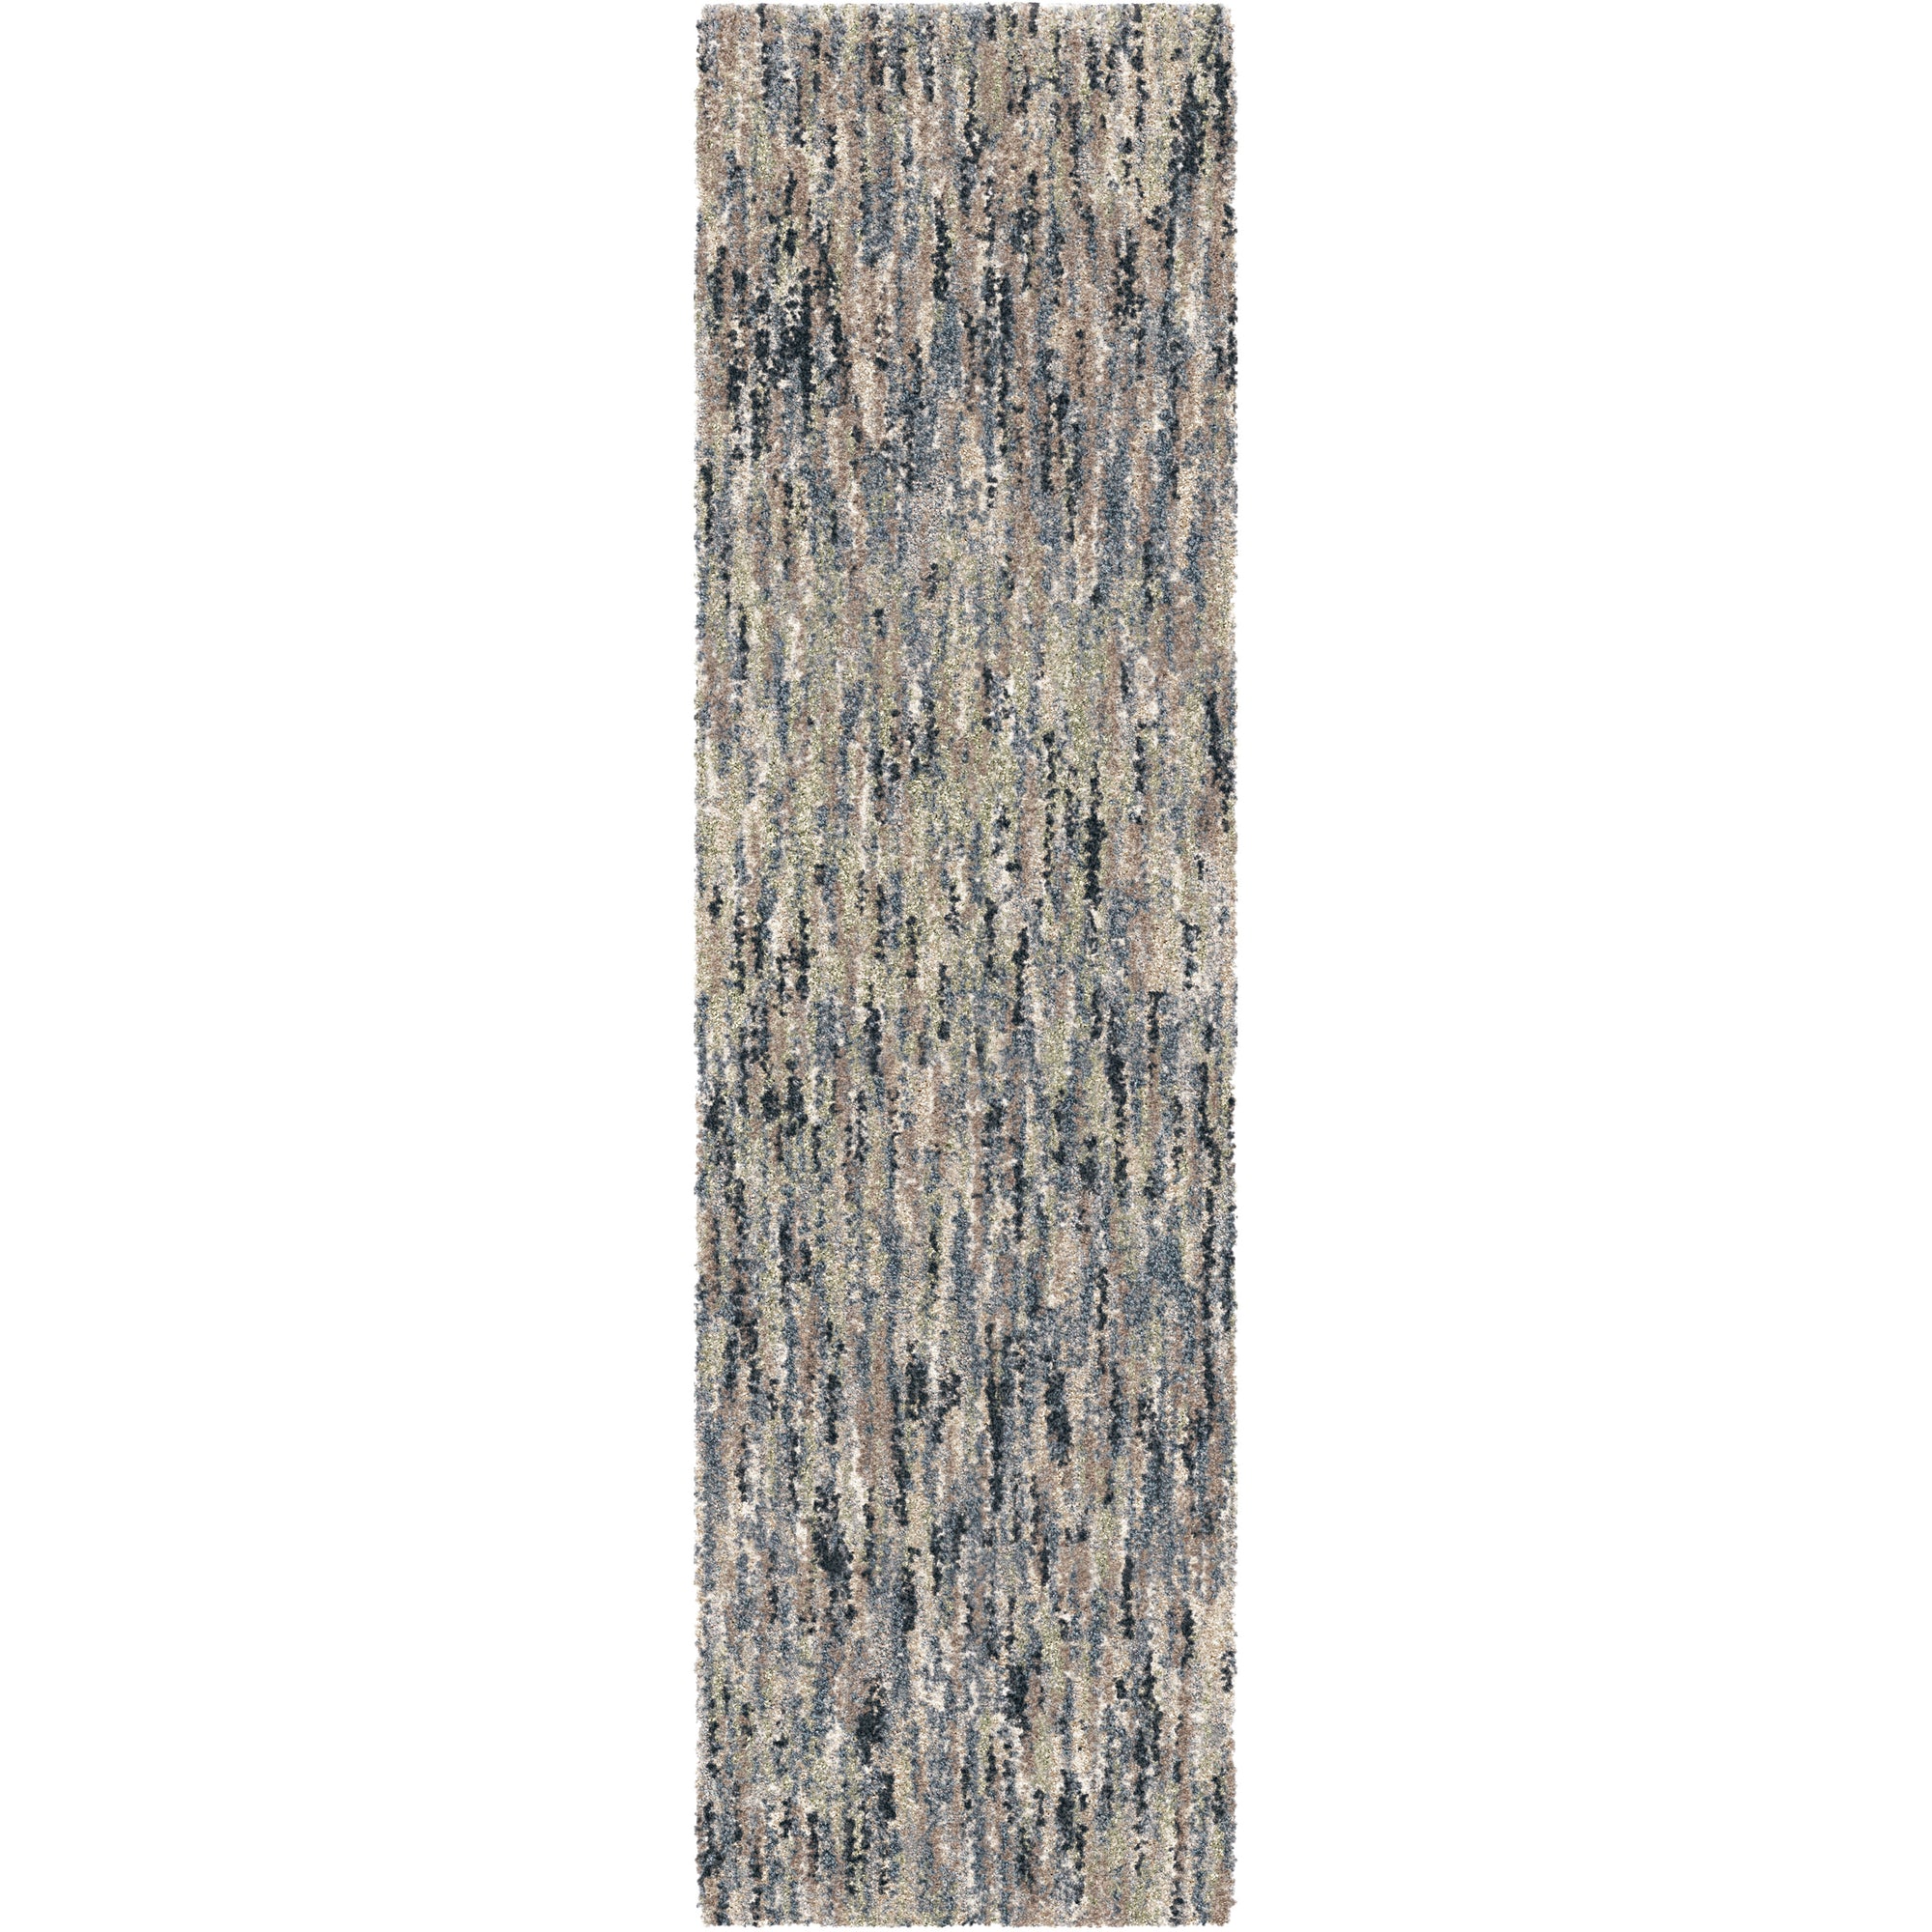 Palmetto Living Next Generation Multi solid Muted Blue Area Rug - 7'10" x 10'10"